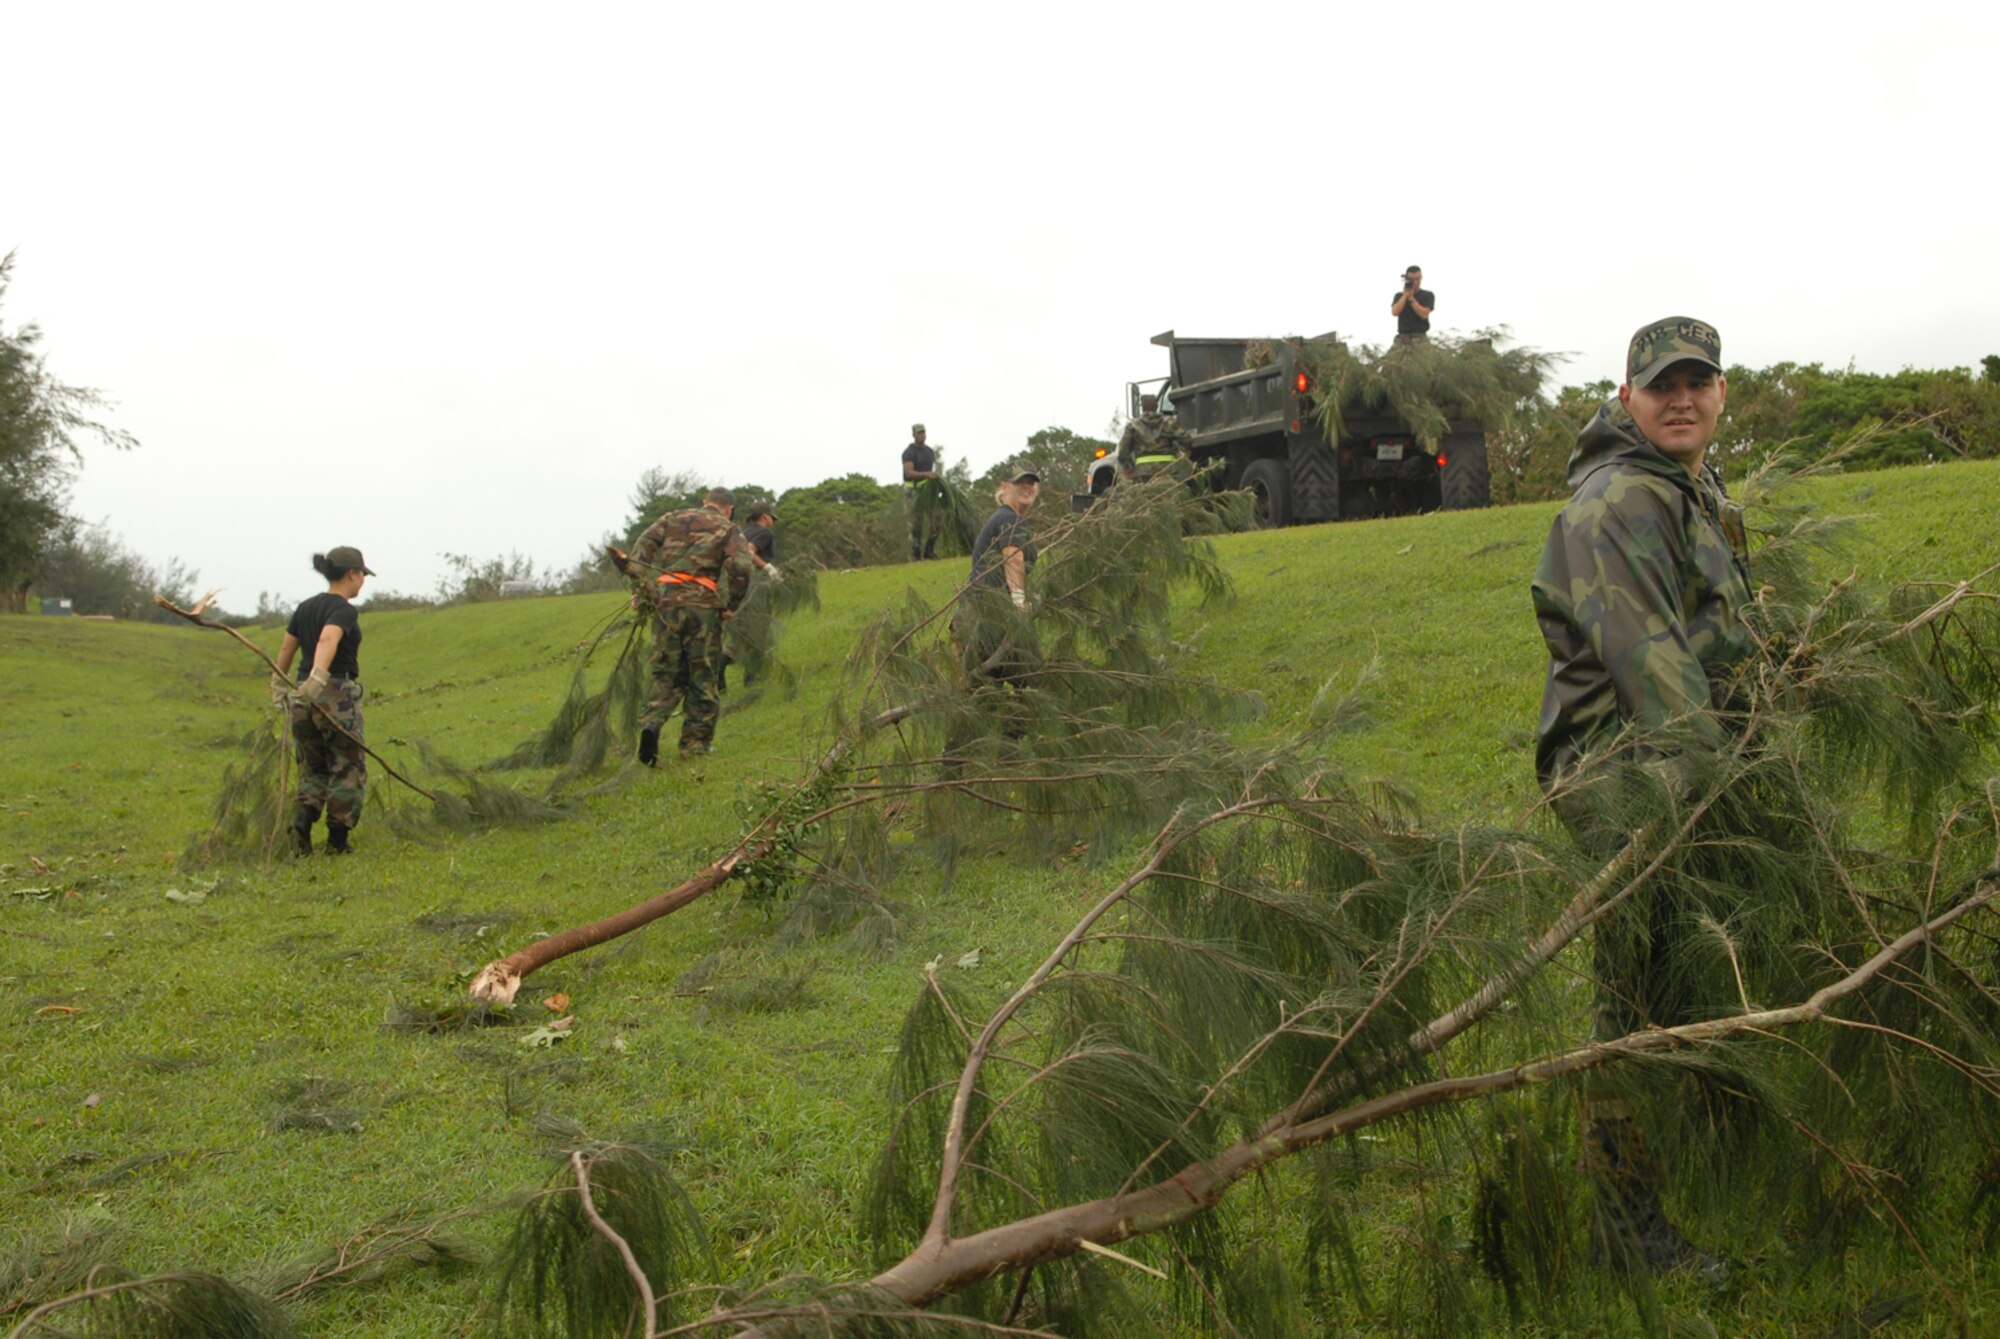 Airmen from the 18th Civil Engineer Group gather tree branches into a pile at Kadena Air Base, Japan, July 14, 2007. The branches were knocked down by Typhoon Man-Yi which brought the base 77 mph winds gusting to 105 mph.  There were no injuries or significant damages to base structures.  The typhoon was the strongest to hit the base since 2003.  Both Airmen are assigned to the 18th Civil Engineer Squadron.  U.S. Air Force Photo/Staff Sgt. Chrissy FitzGerald